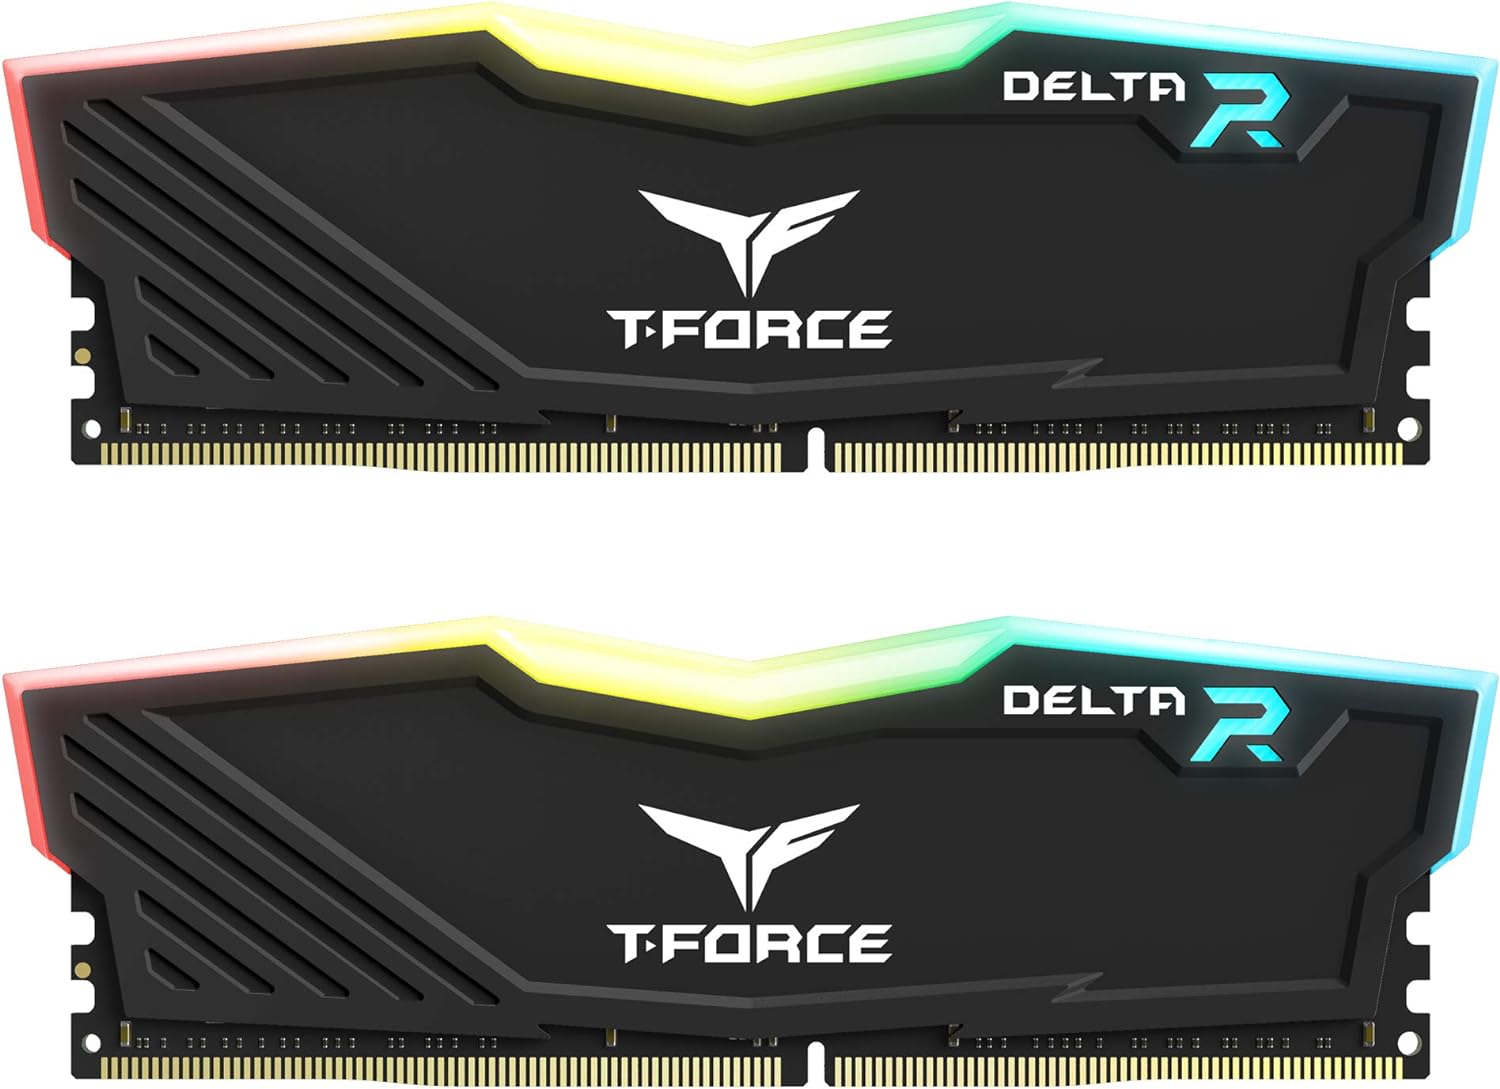 TEAMGROUP T-Force Delta RGB DDR4 64GB RAM - Full frame 120° ultra wide angle lighting, aluminum alloy heat spreader 0765441654914